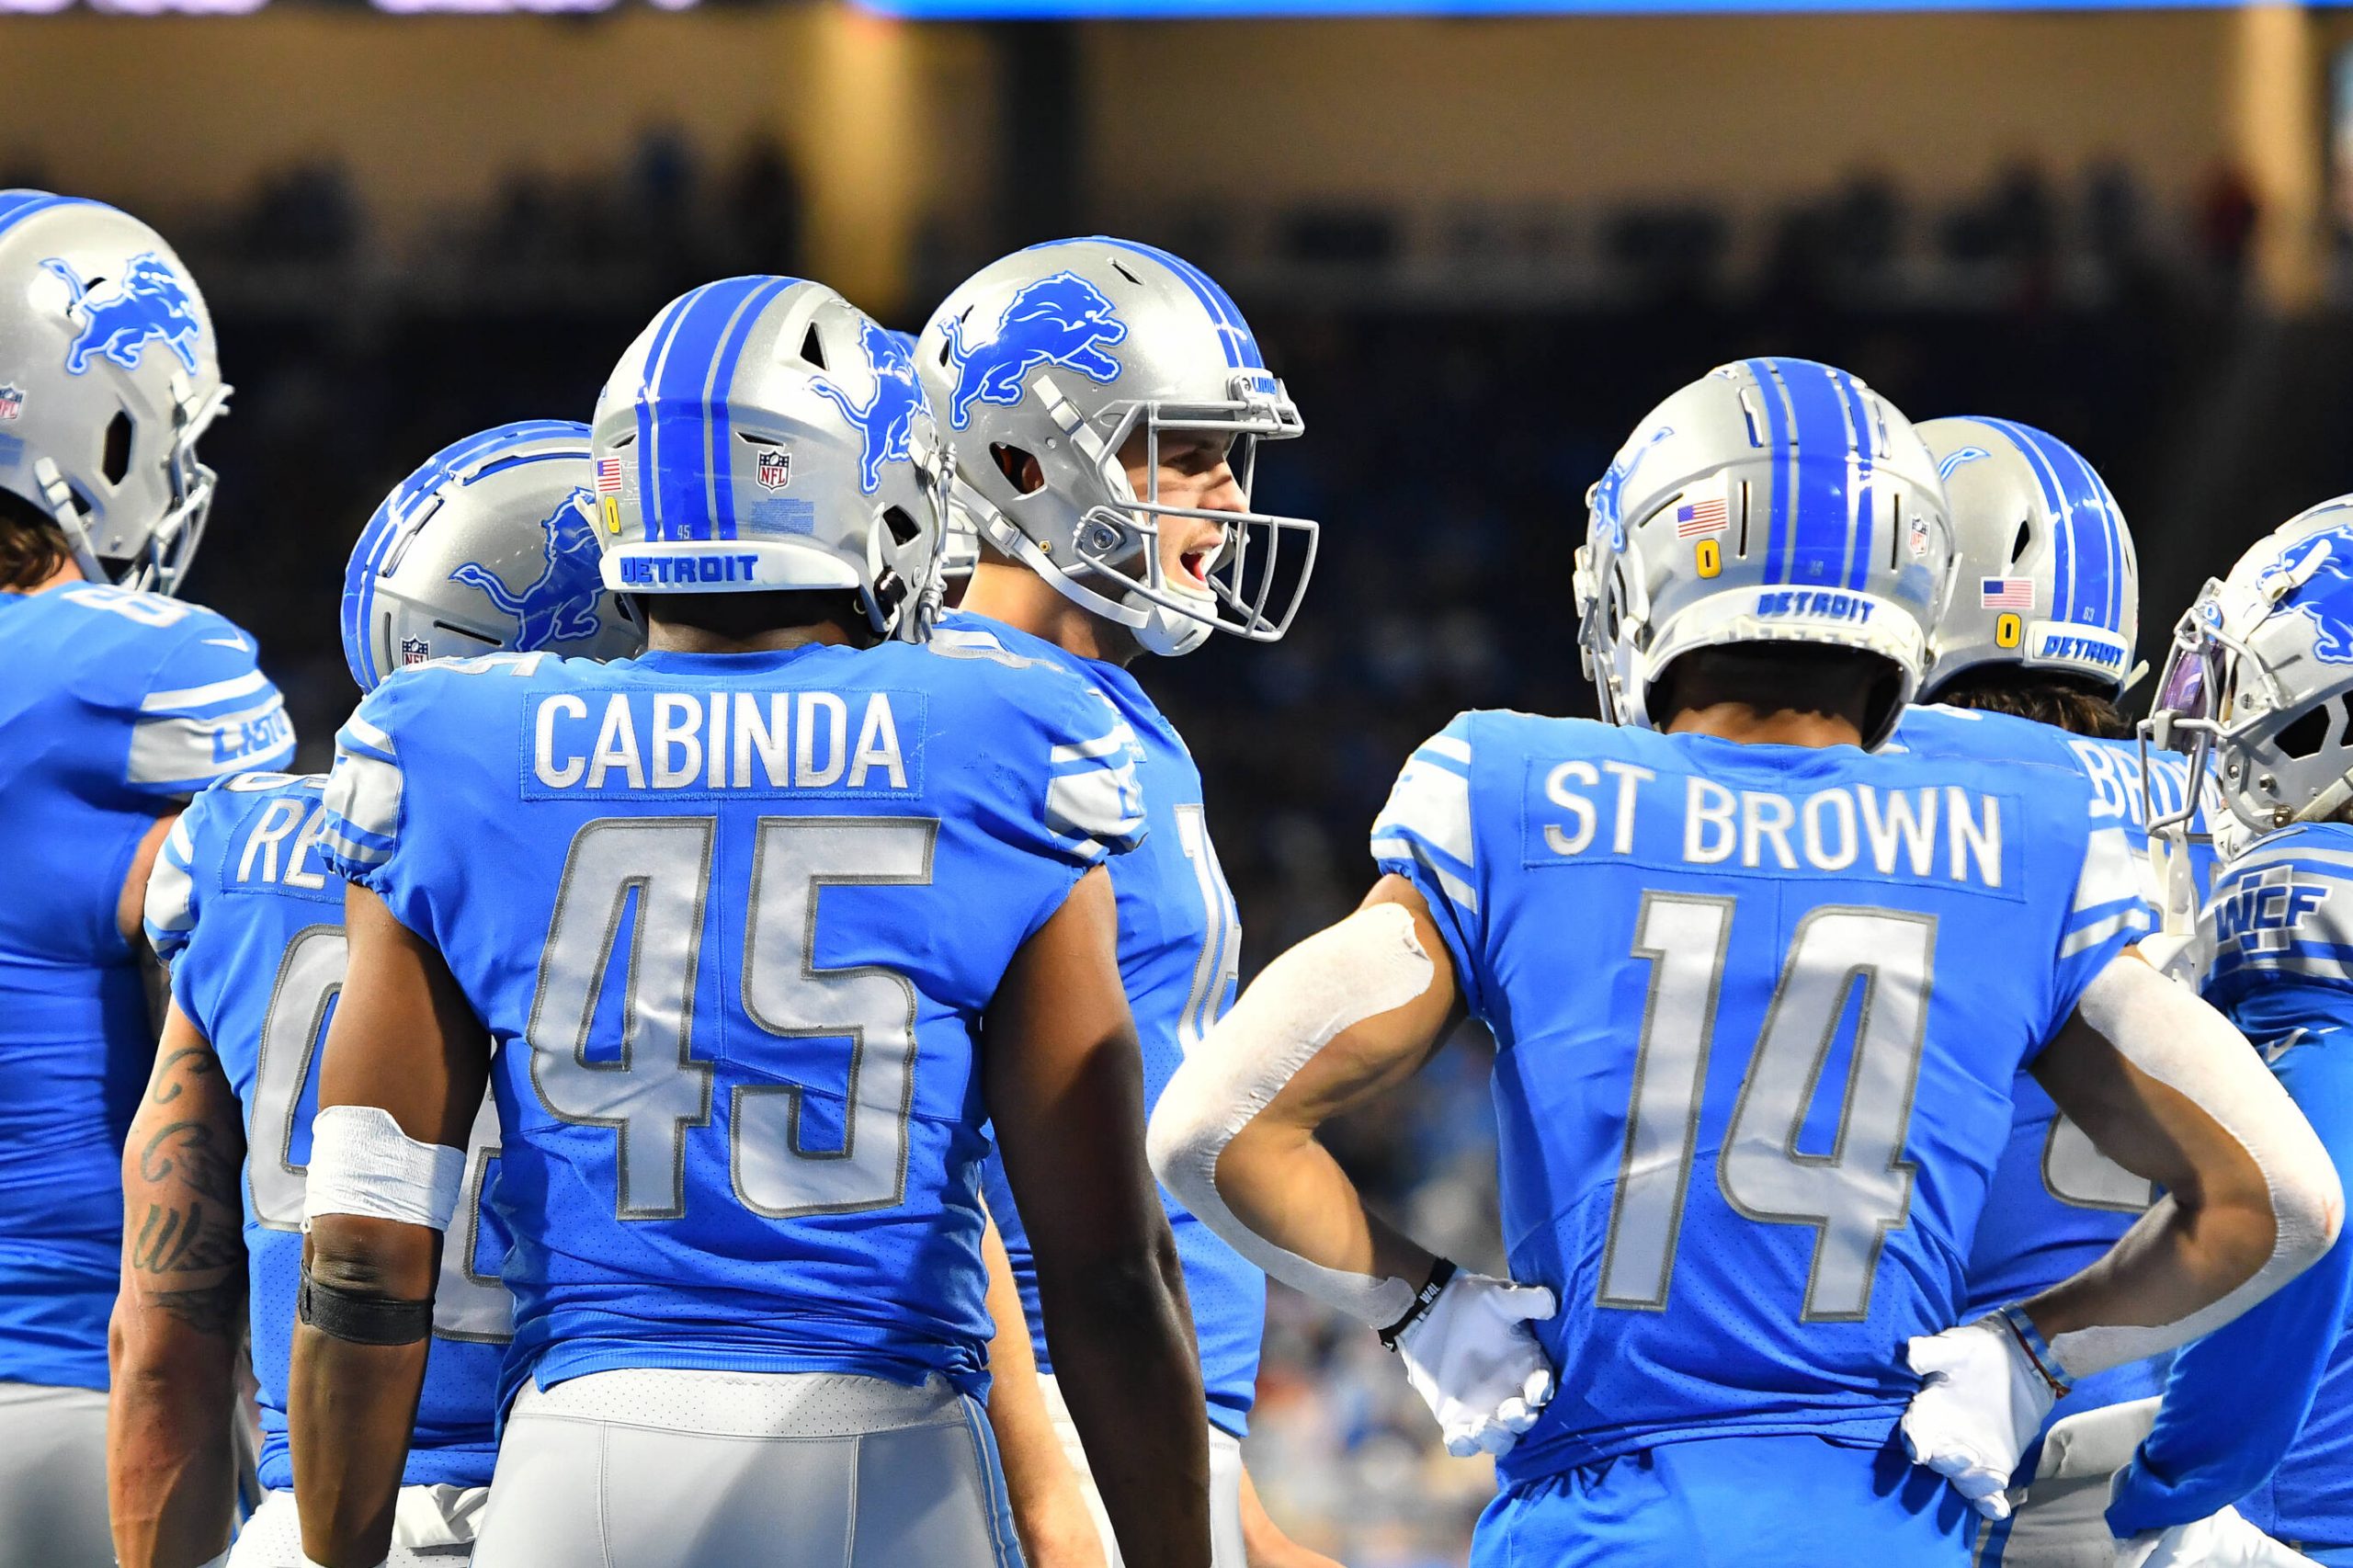 DETROIT, MI - DECEMBER 19: Detroit Lions quarterback Jared Goff 16 calls a play in the huddle during the game between the Detroit Lions and the Arizona Cardinals on Sunday December 19, 2021 at Ford Field in Detroit, MI. Photo by Steven King/Icon Sportswire NFL, American Football Herren, USA DEC 19 Cardinals at Lions Icon258202112190050